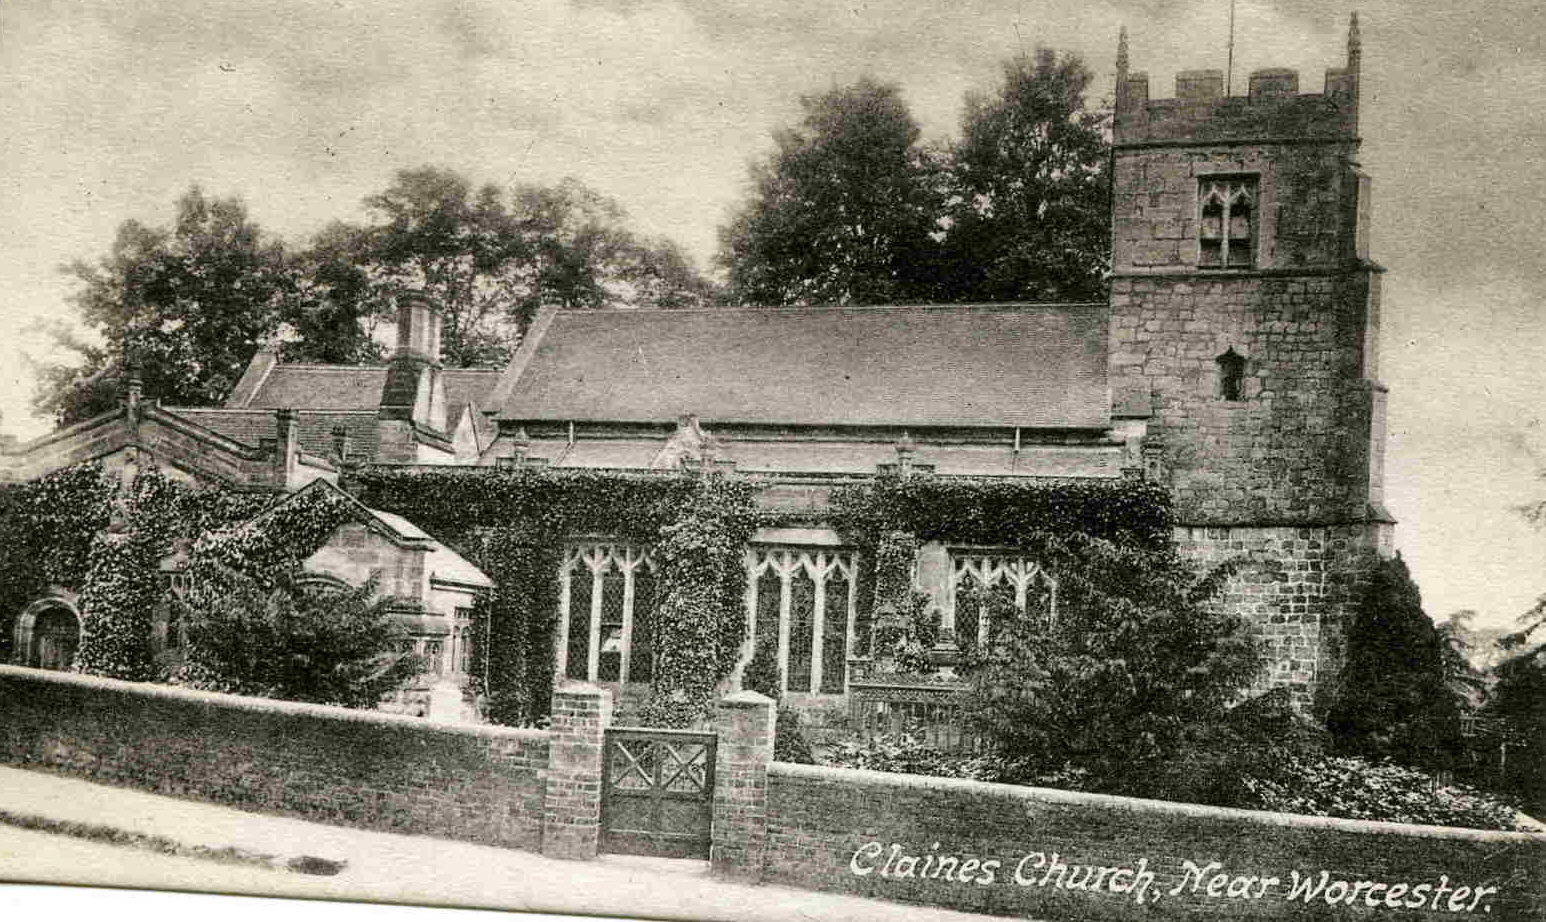 A postcard of Claines Church from the early 20th century. Photo courtesy Friends of Claines Church